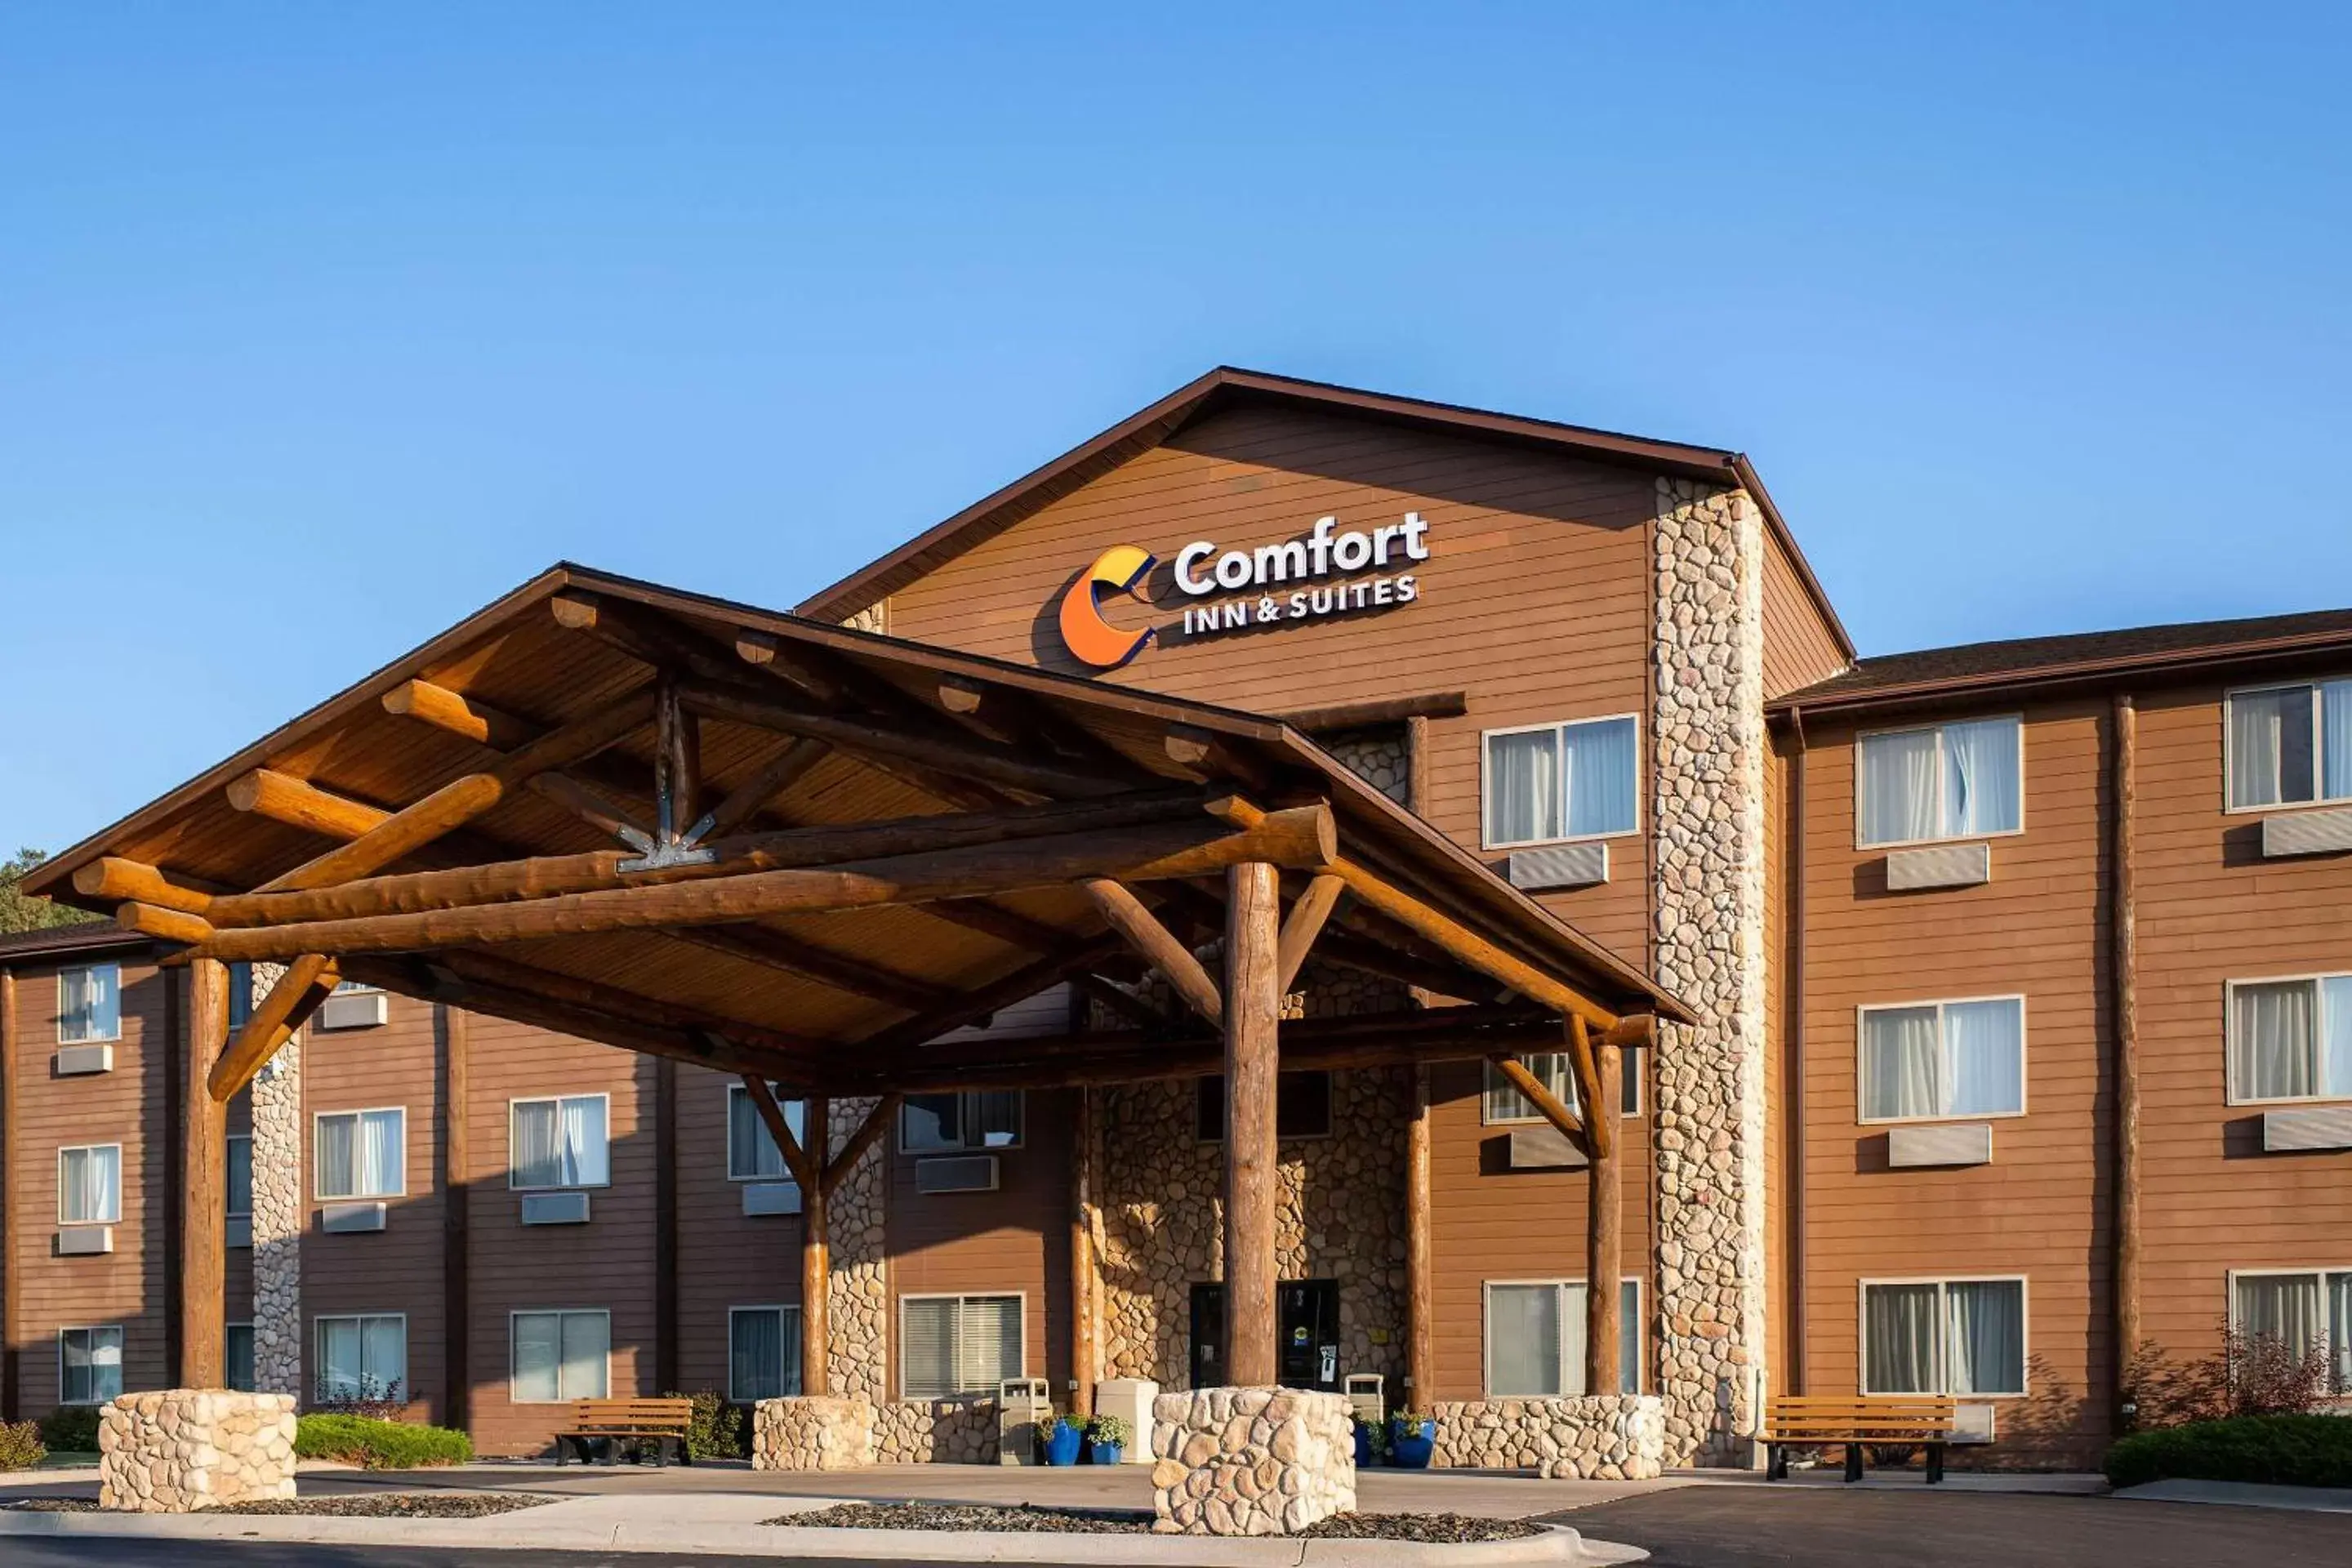 Property building in Comfort Inn & Suites Near Custer State Park and Mt Rushmore